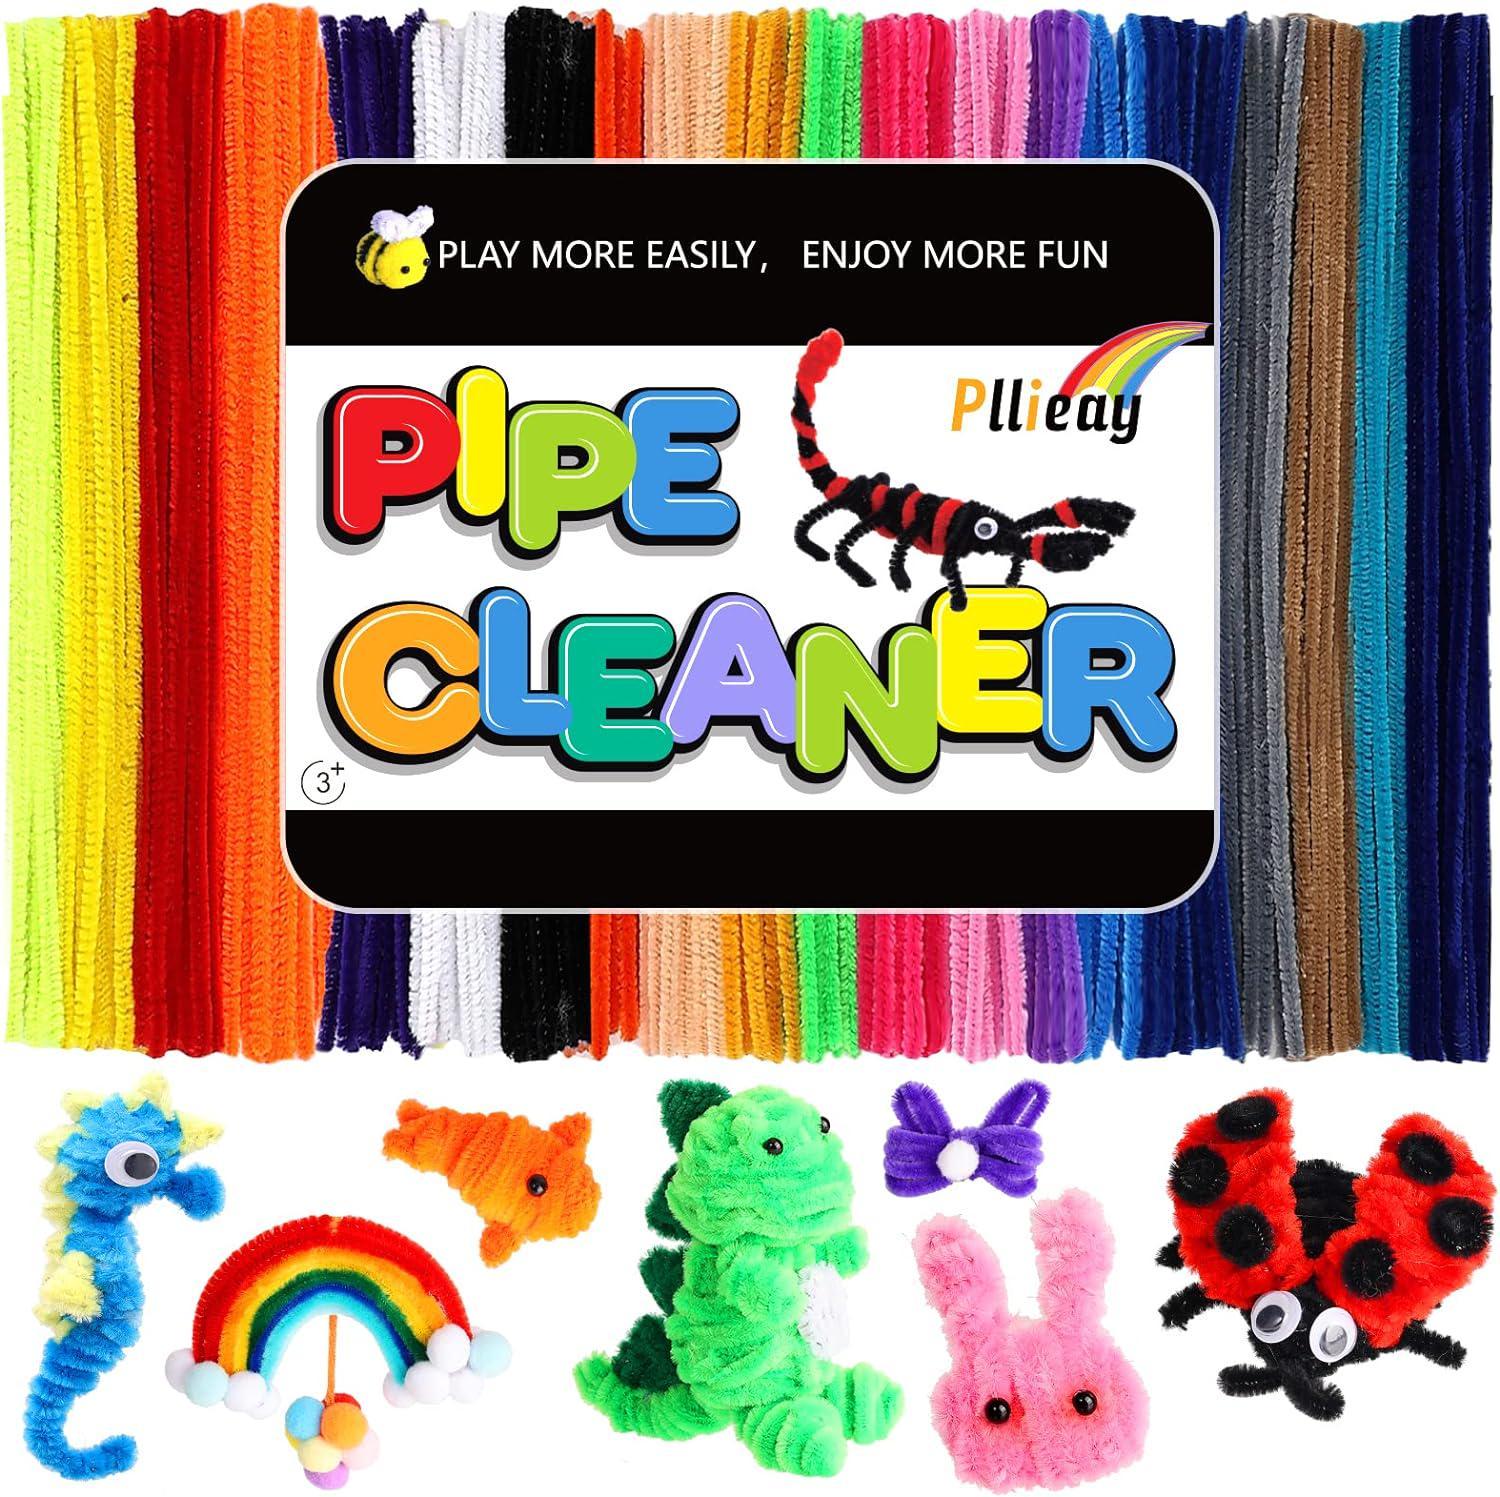 Pipe Cleaners for Crafts (200pcs in Christmas Green), 12 inch Long Pipe  Cleaners, Christmas Green Pipe Cleaners. 